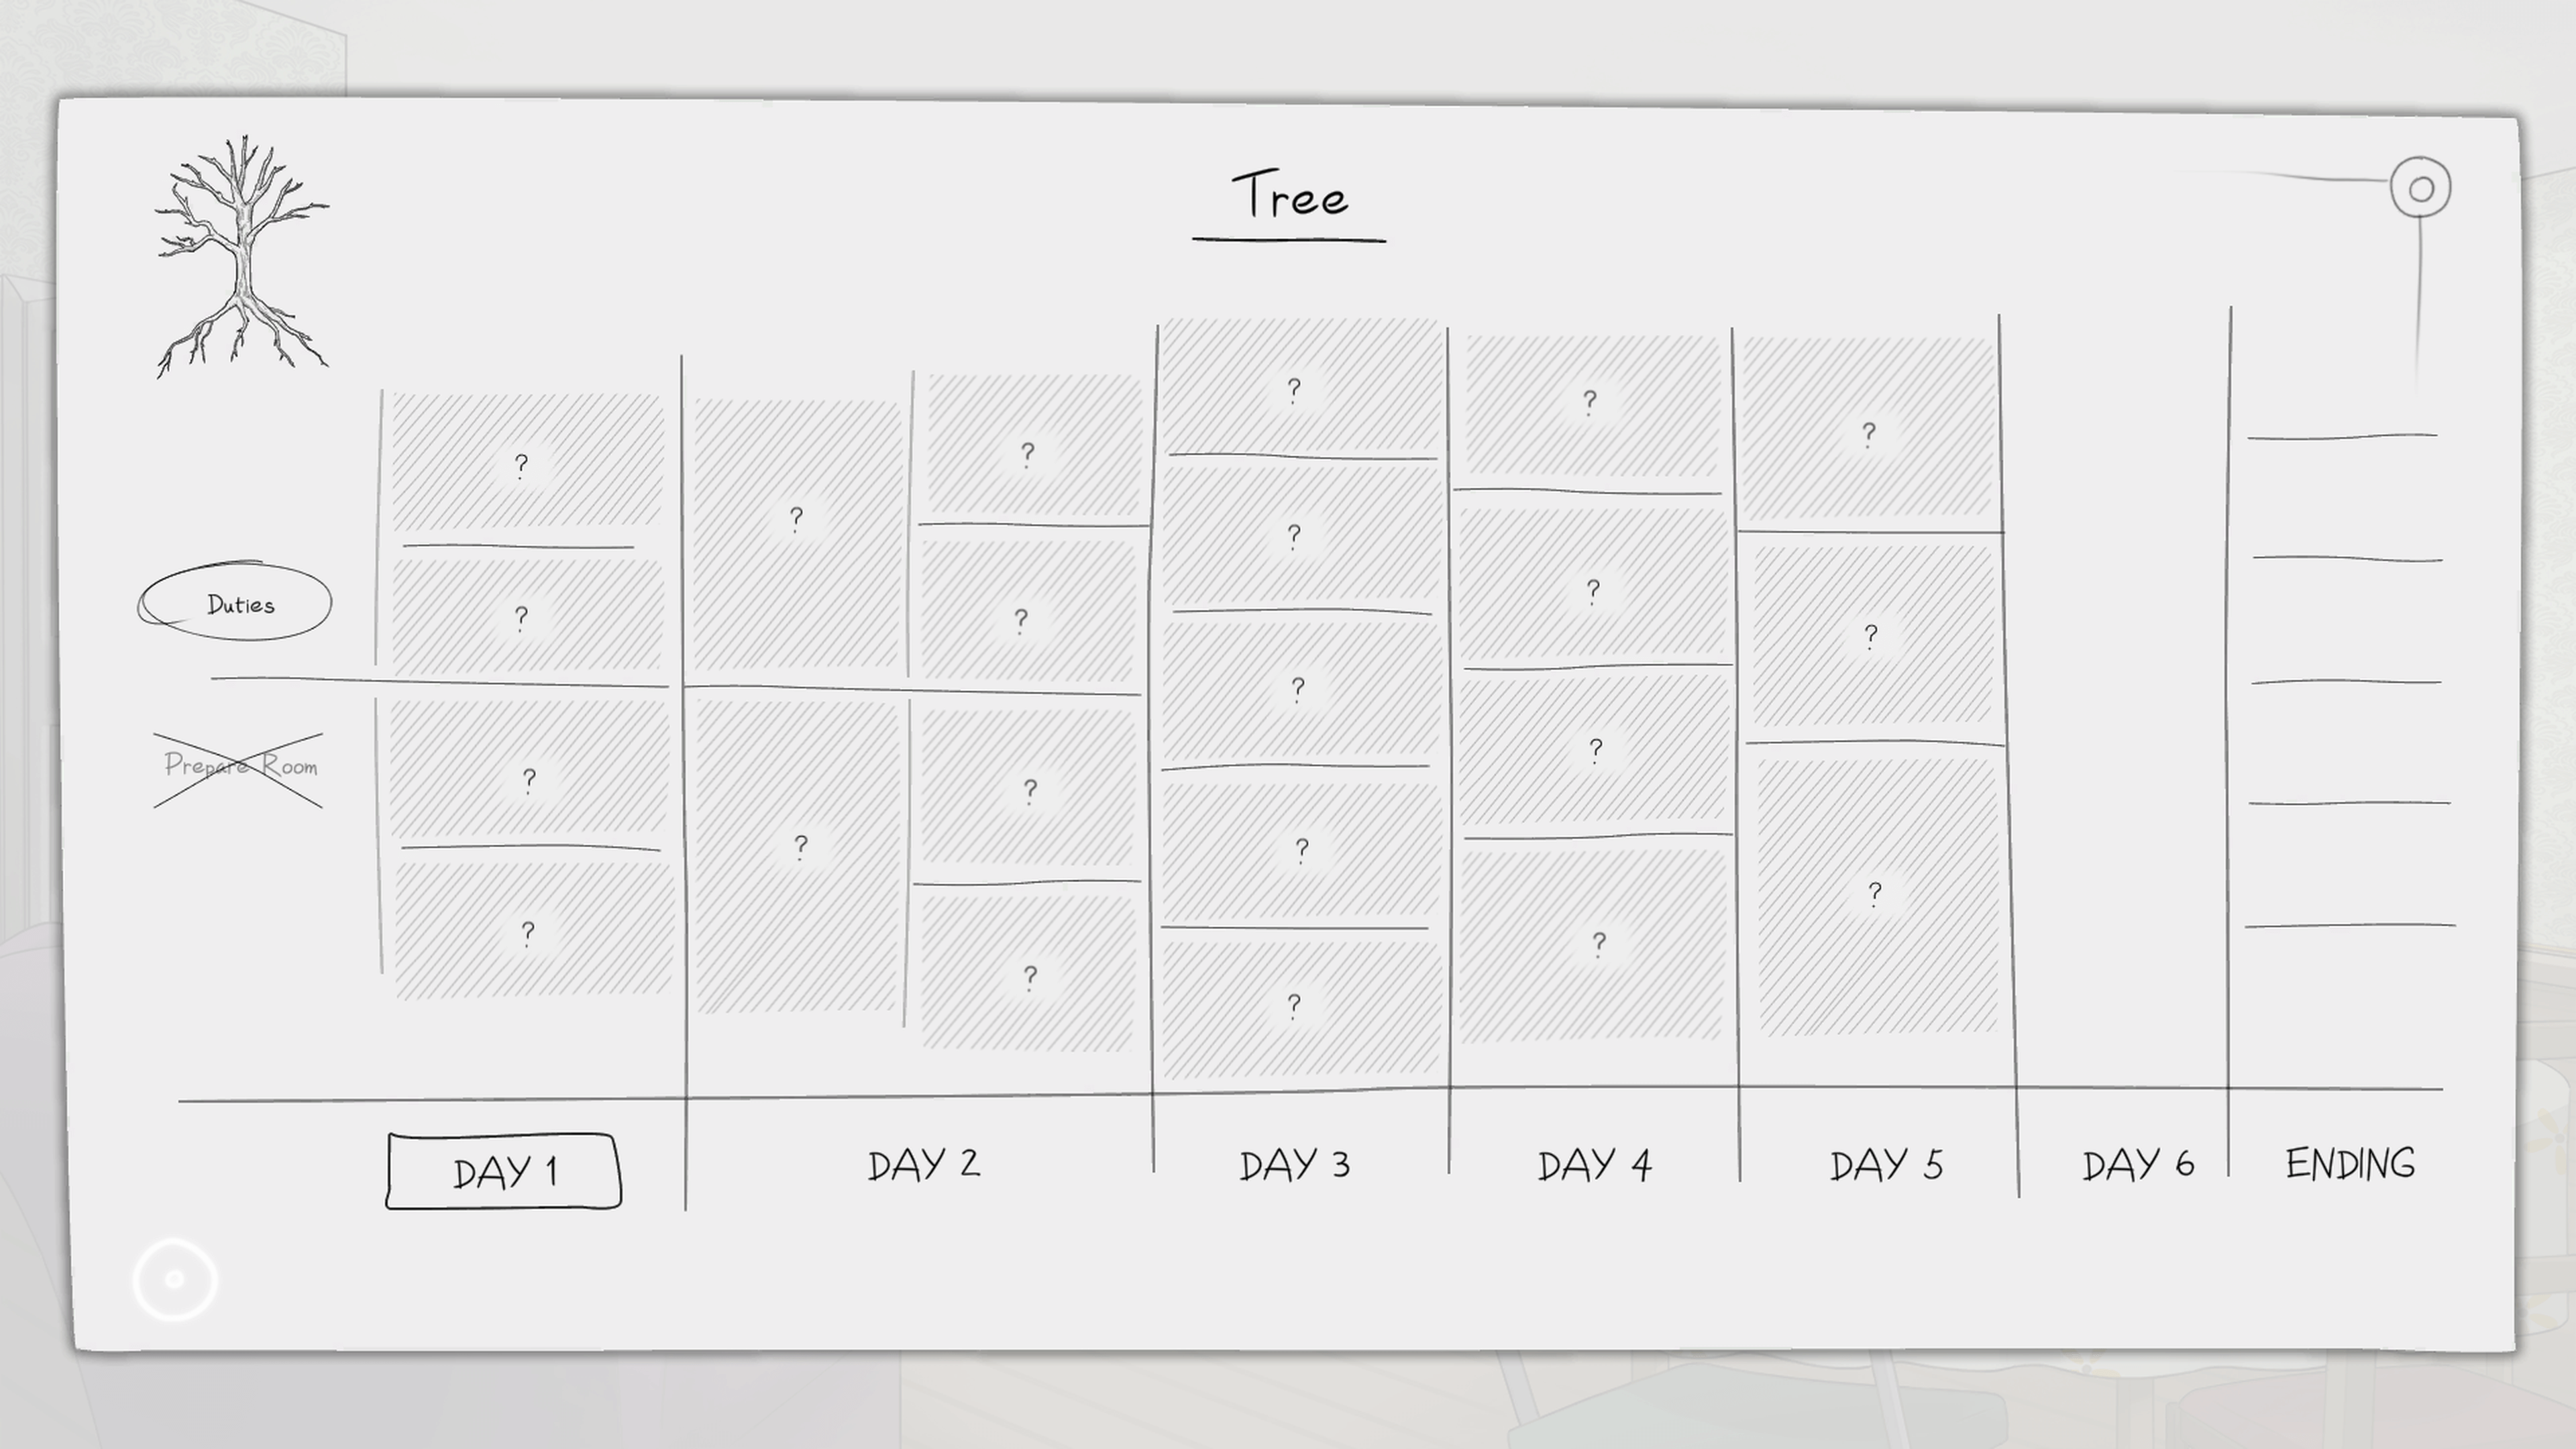 an A4 sheet of paper in landscape orientation. It is divided into segments labeled day 1-6 and ending. The page has the underlined title "Tree" centered at the top with a logo of a tree with its roots visible to the left